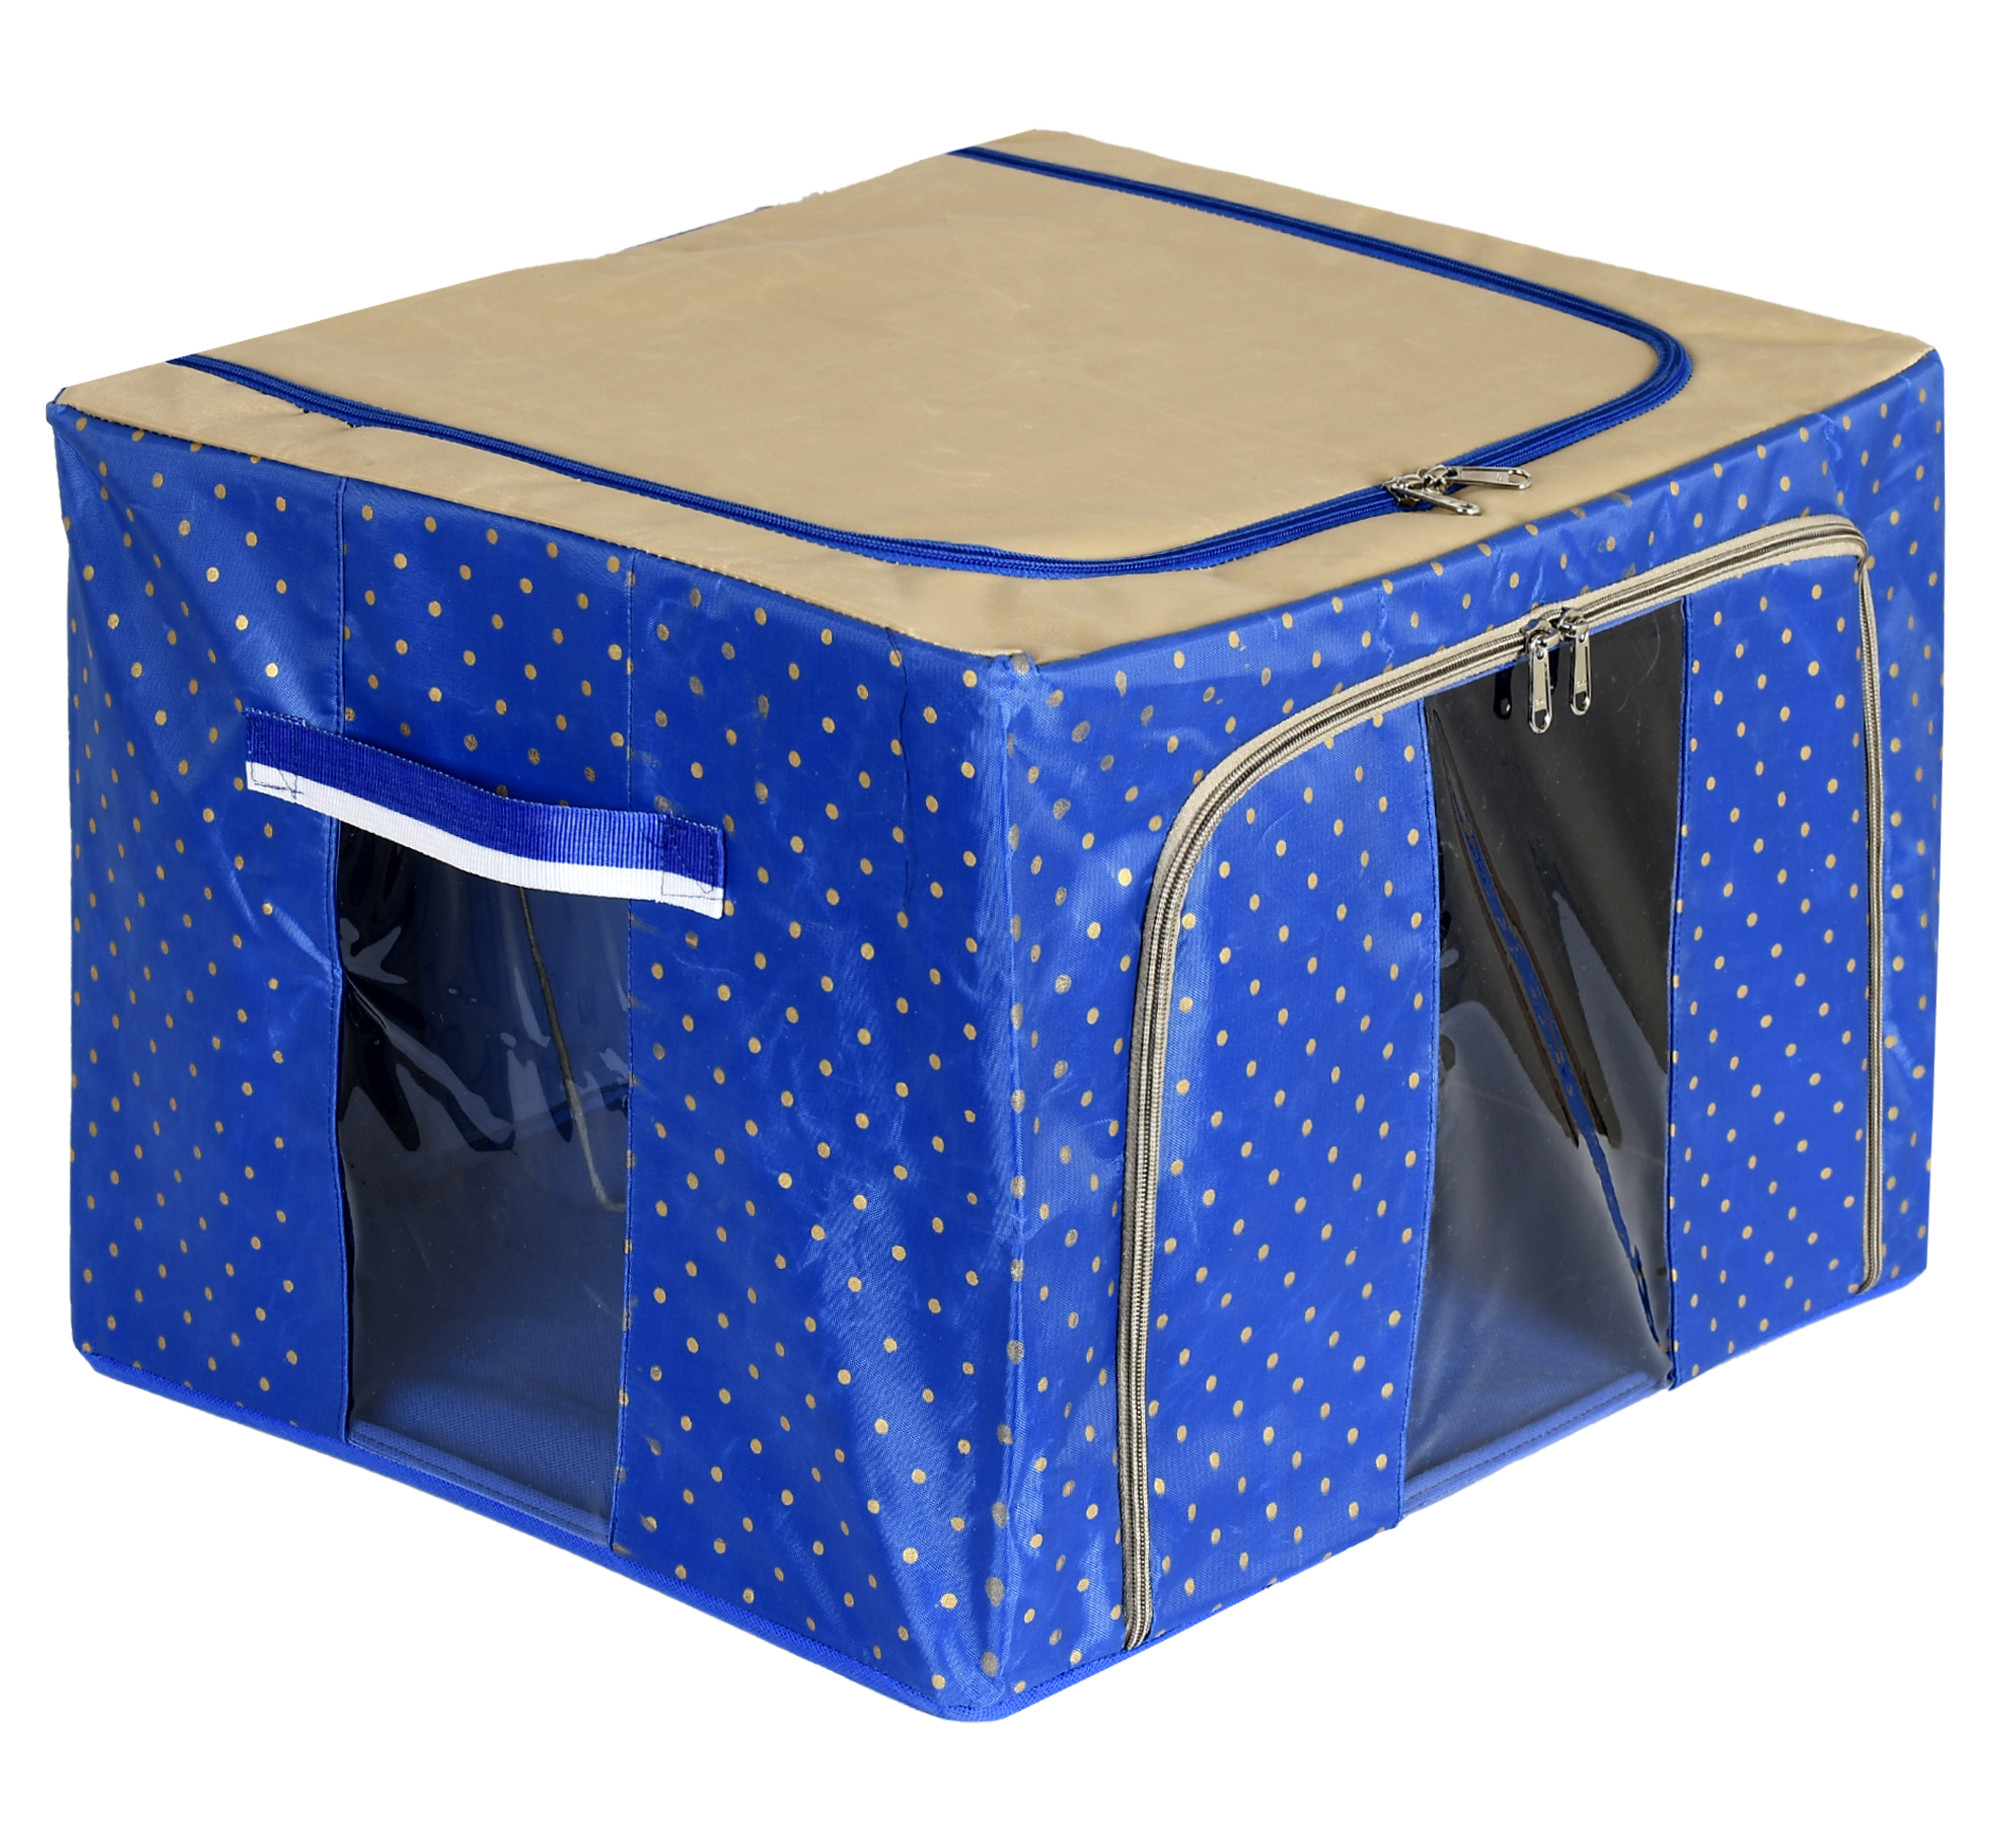 Kuber Industries Dot Printed Steel Frame Storage Box/Organizer For Clothing, Blankets, Bedding With Clear Window, 24Ltr. (Blue & Brown)-44KM0217